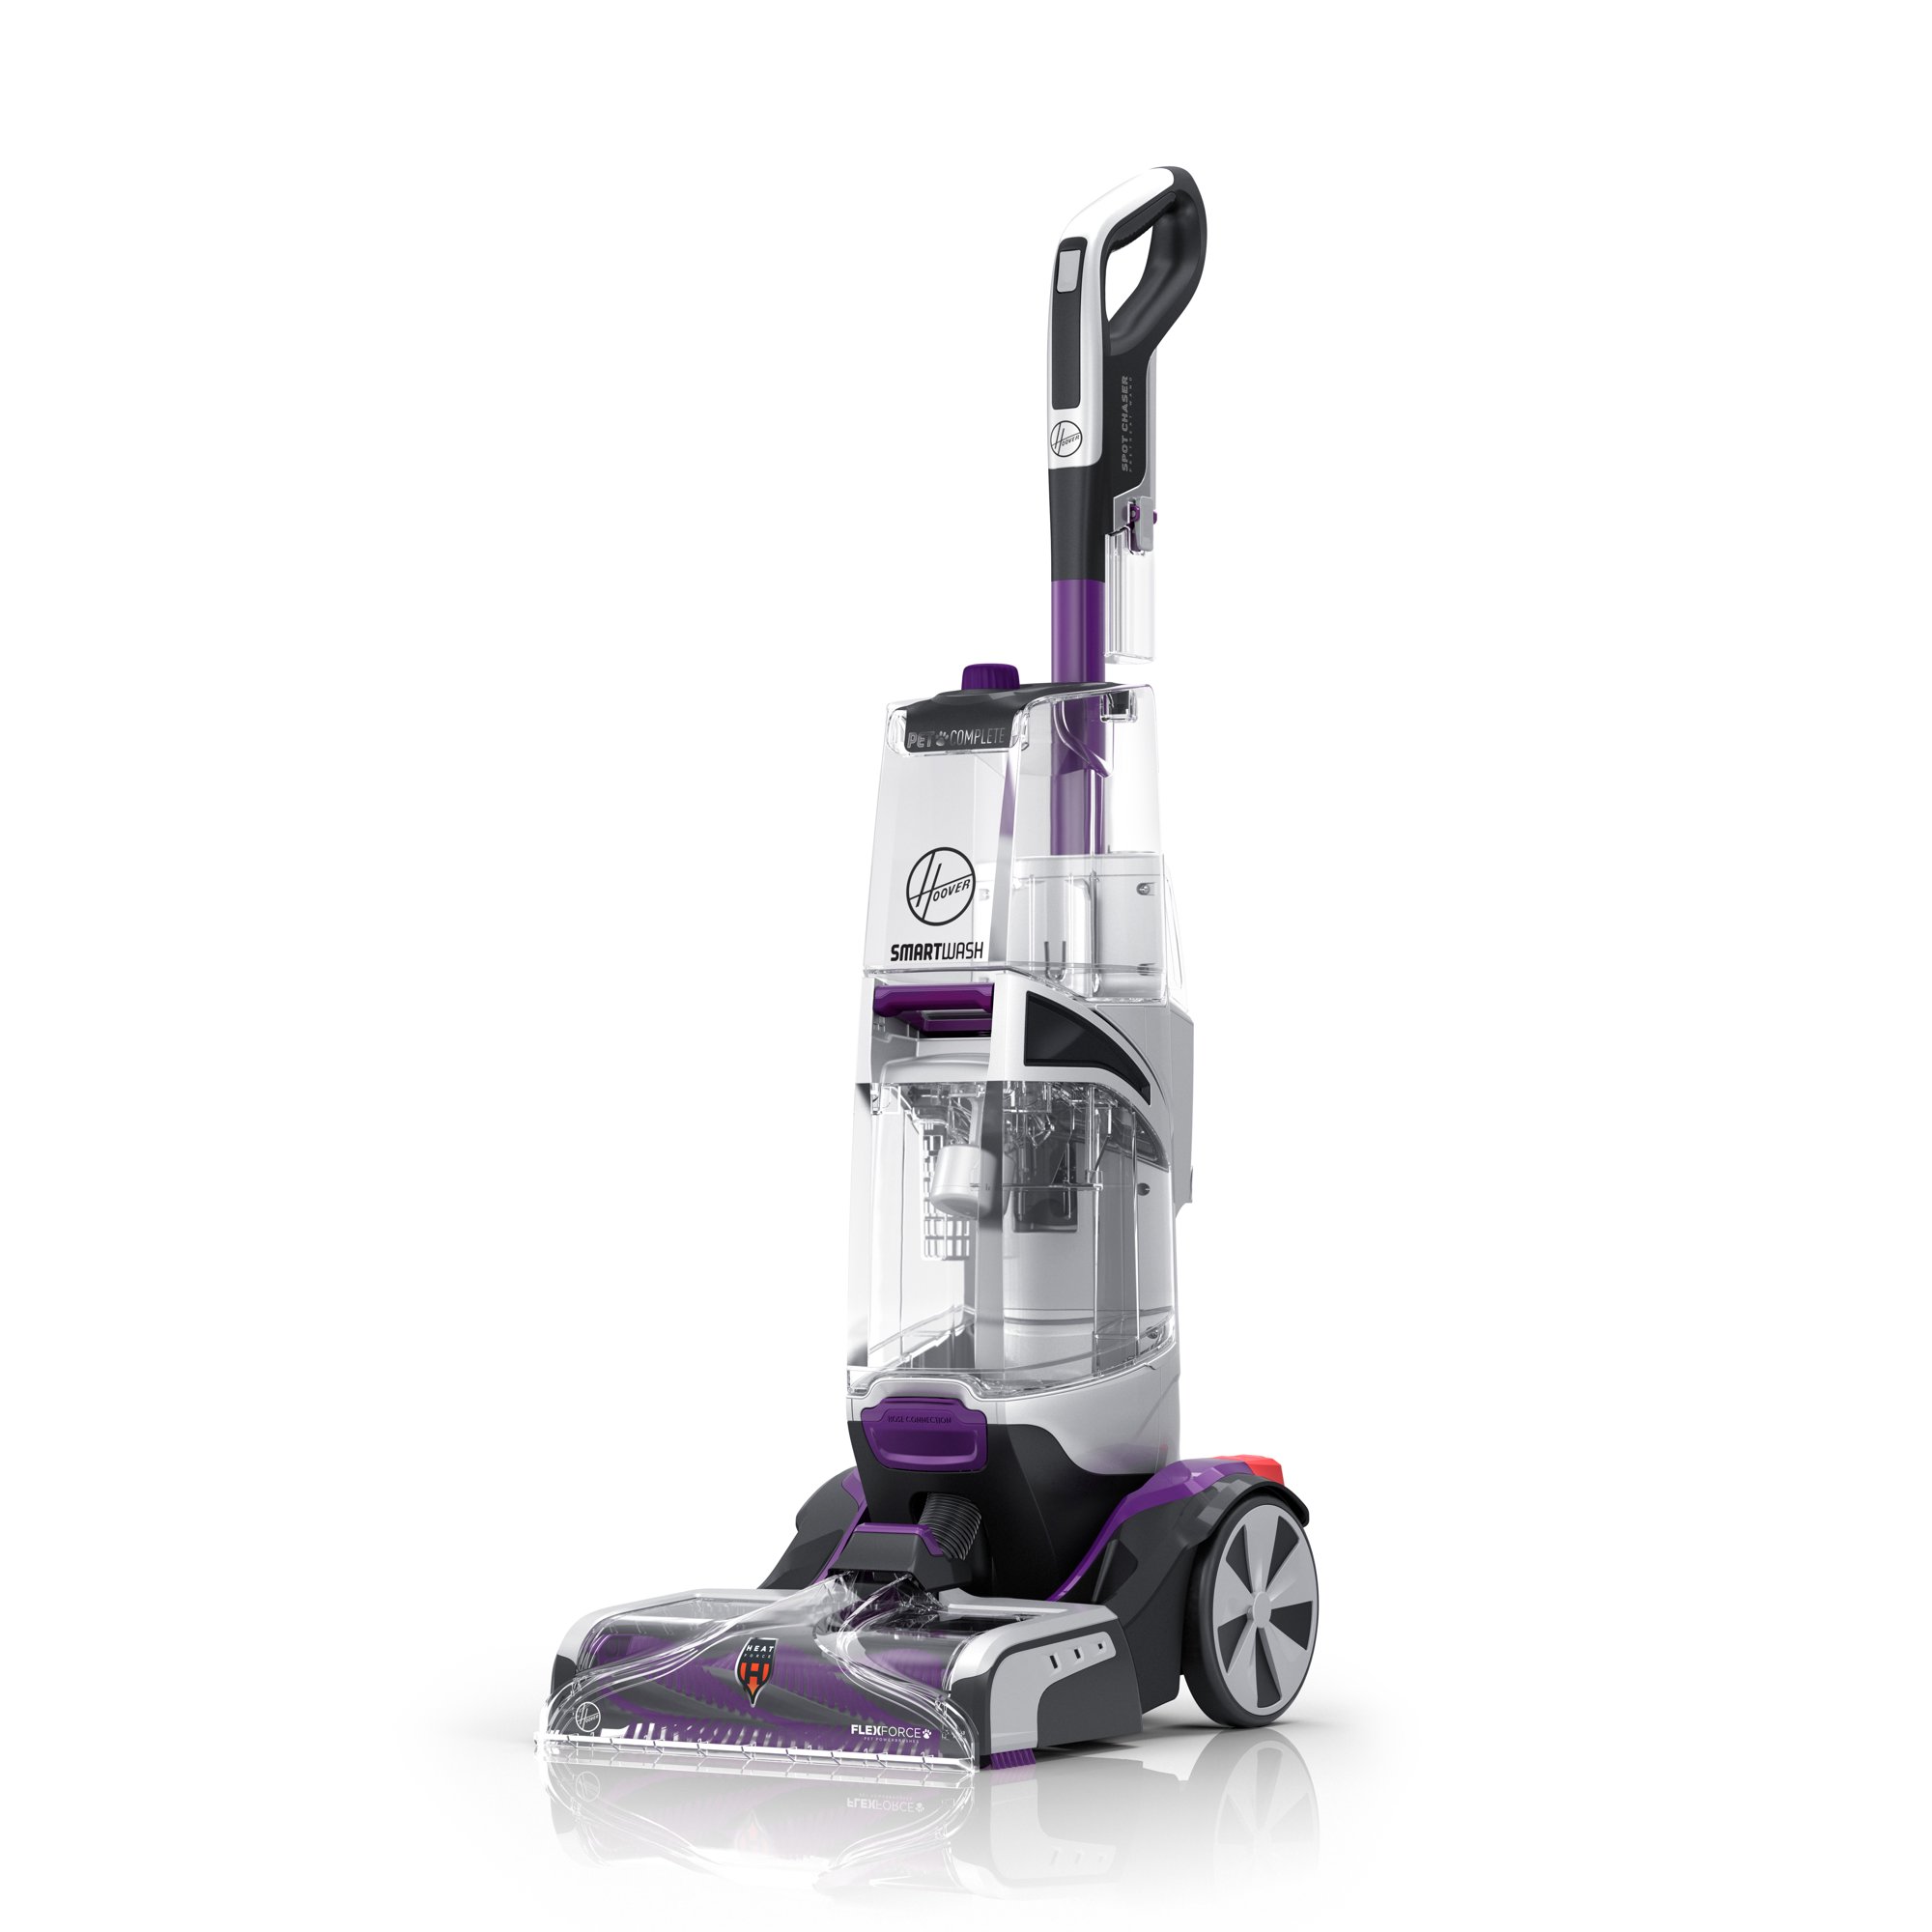 Hoover Smart Wash Pet Carpet Cleaner Machine FH53010 $148 + Free Shipping